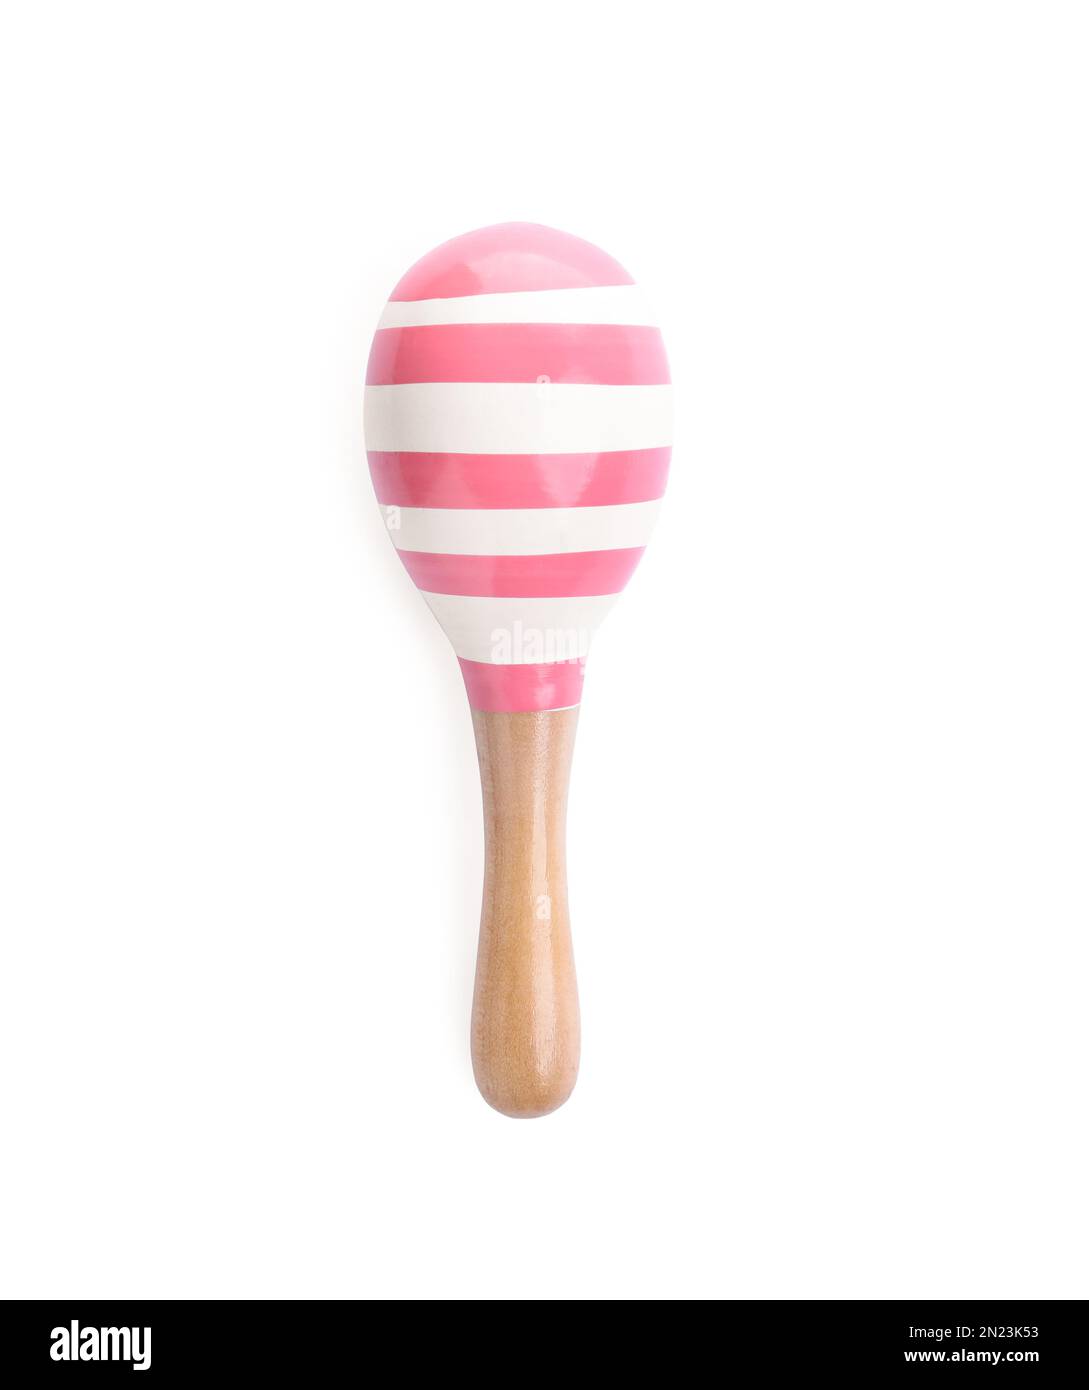 Wooden toy maraca on white background, top view Stock Photo